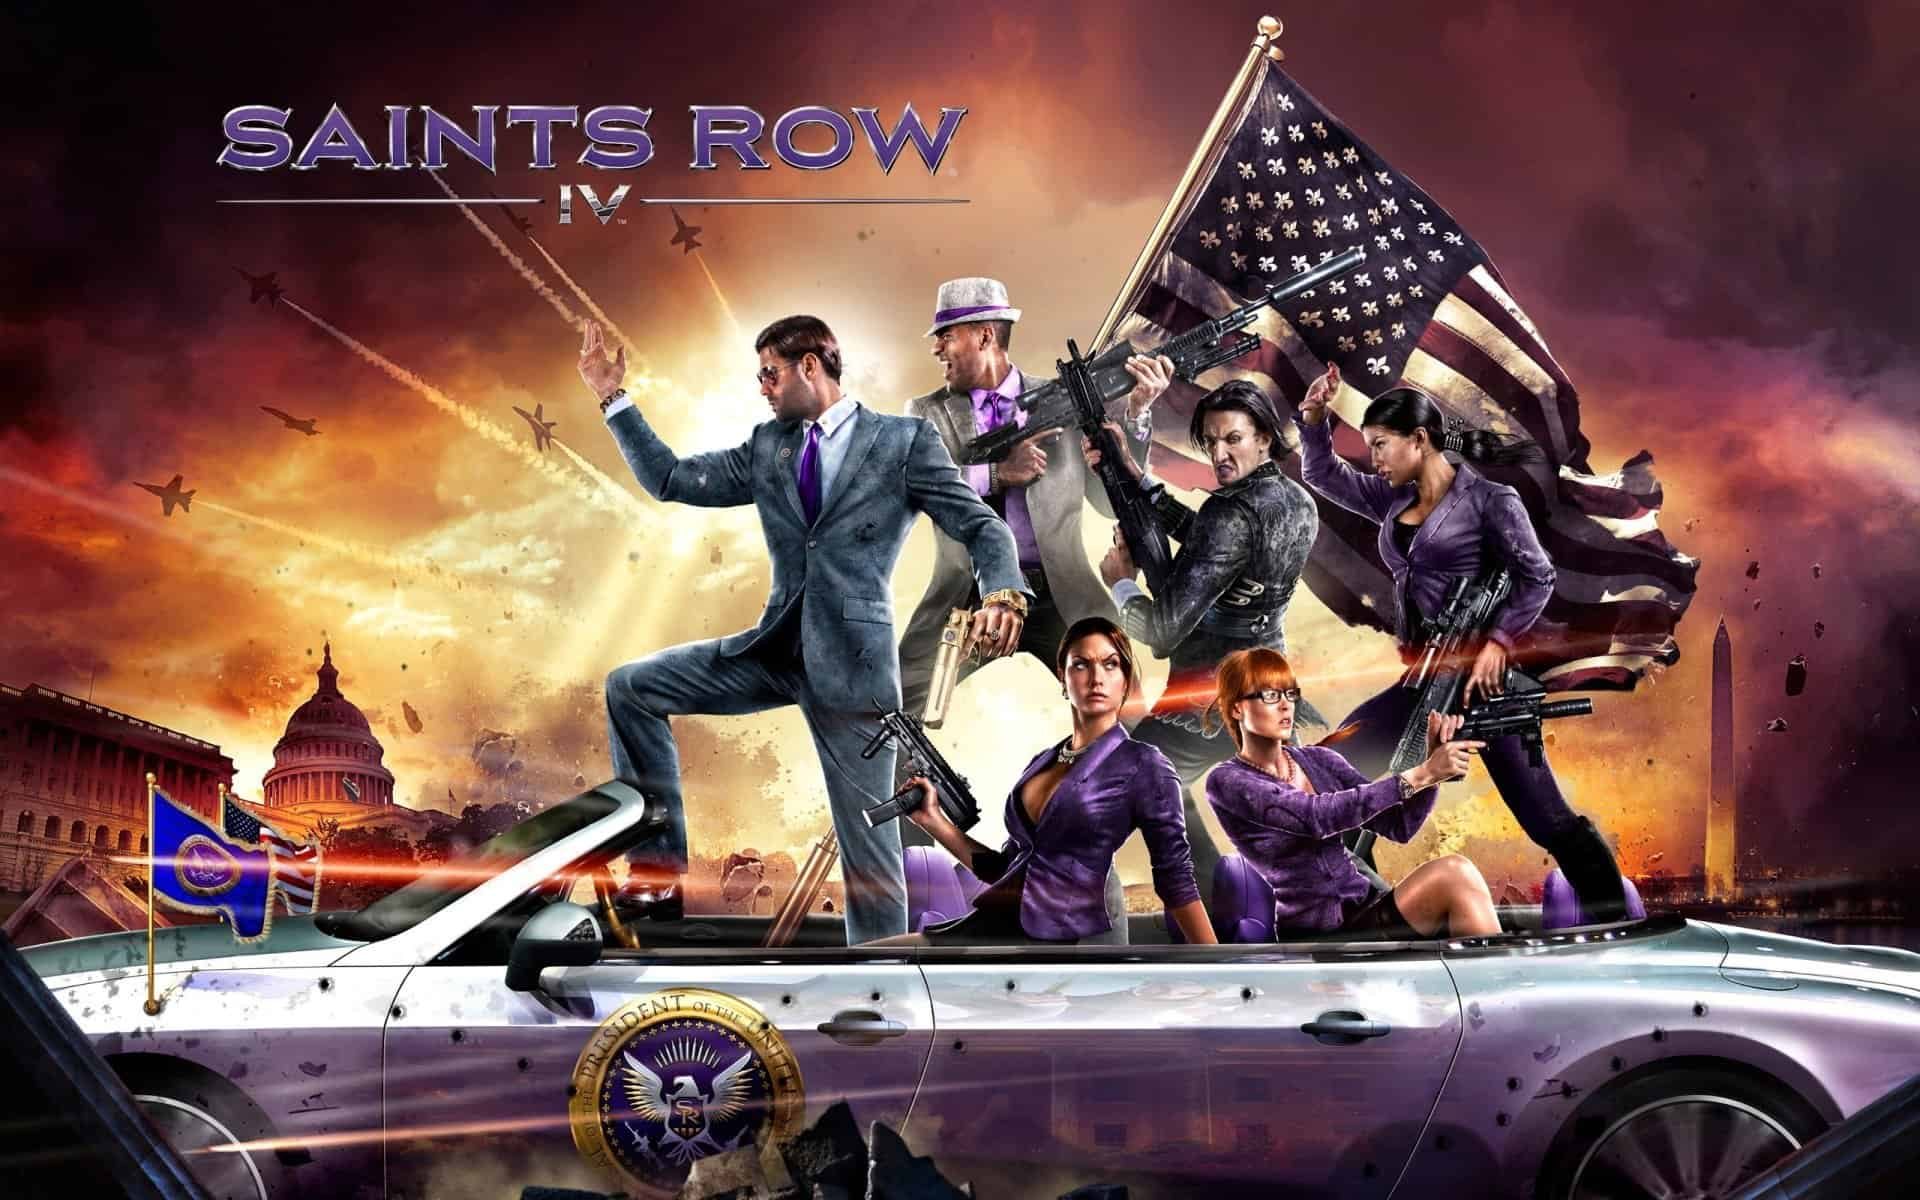 Action Sequence All Saints Row 4